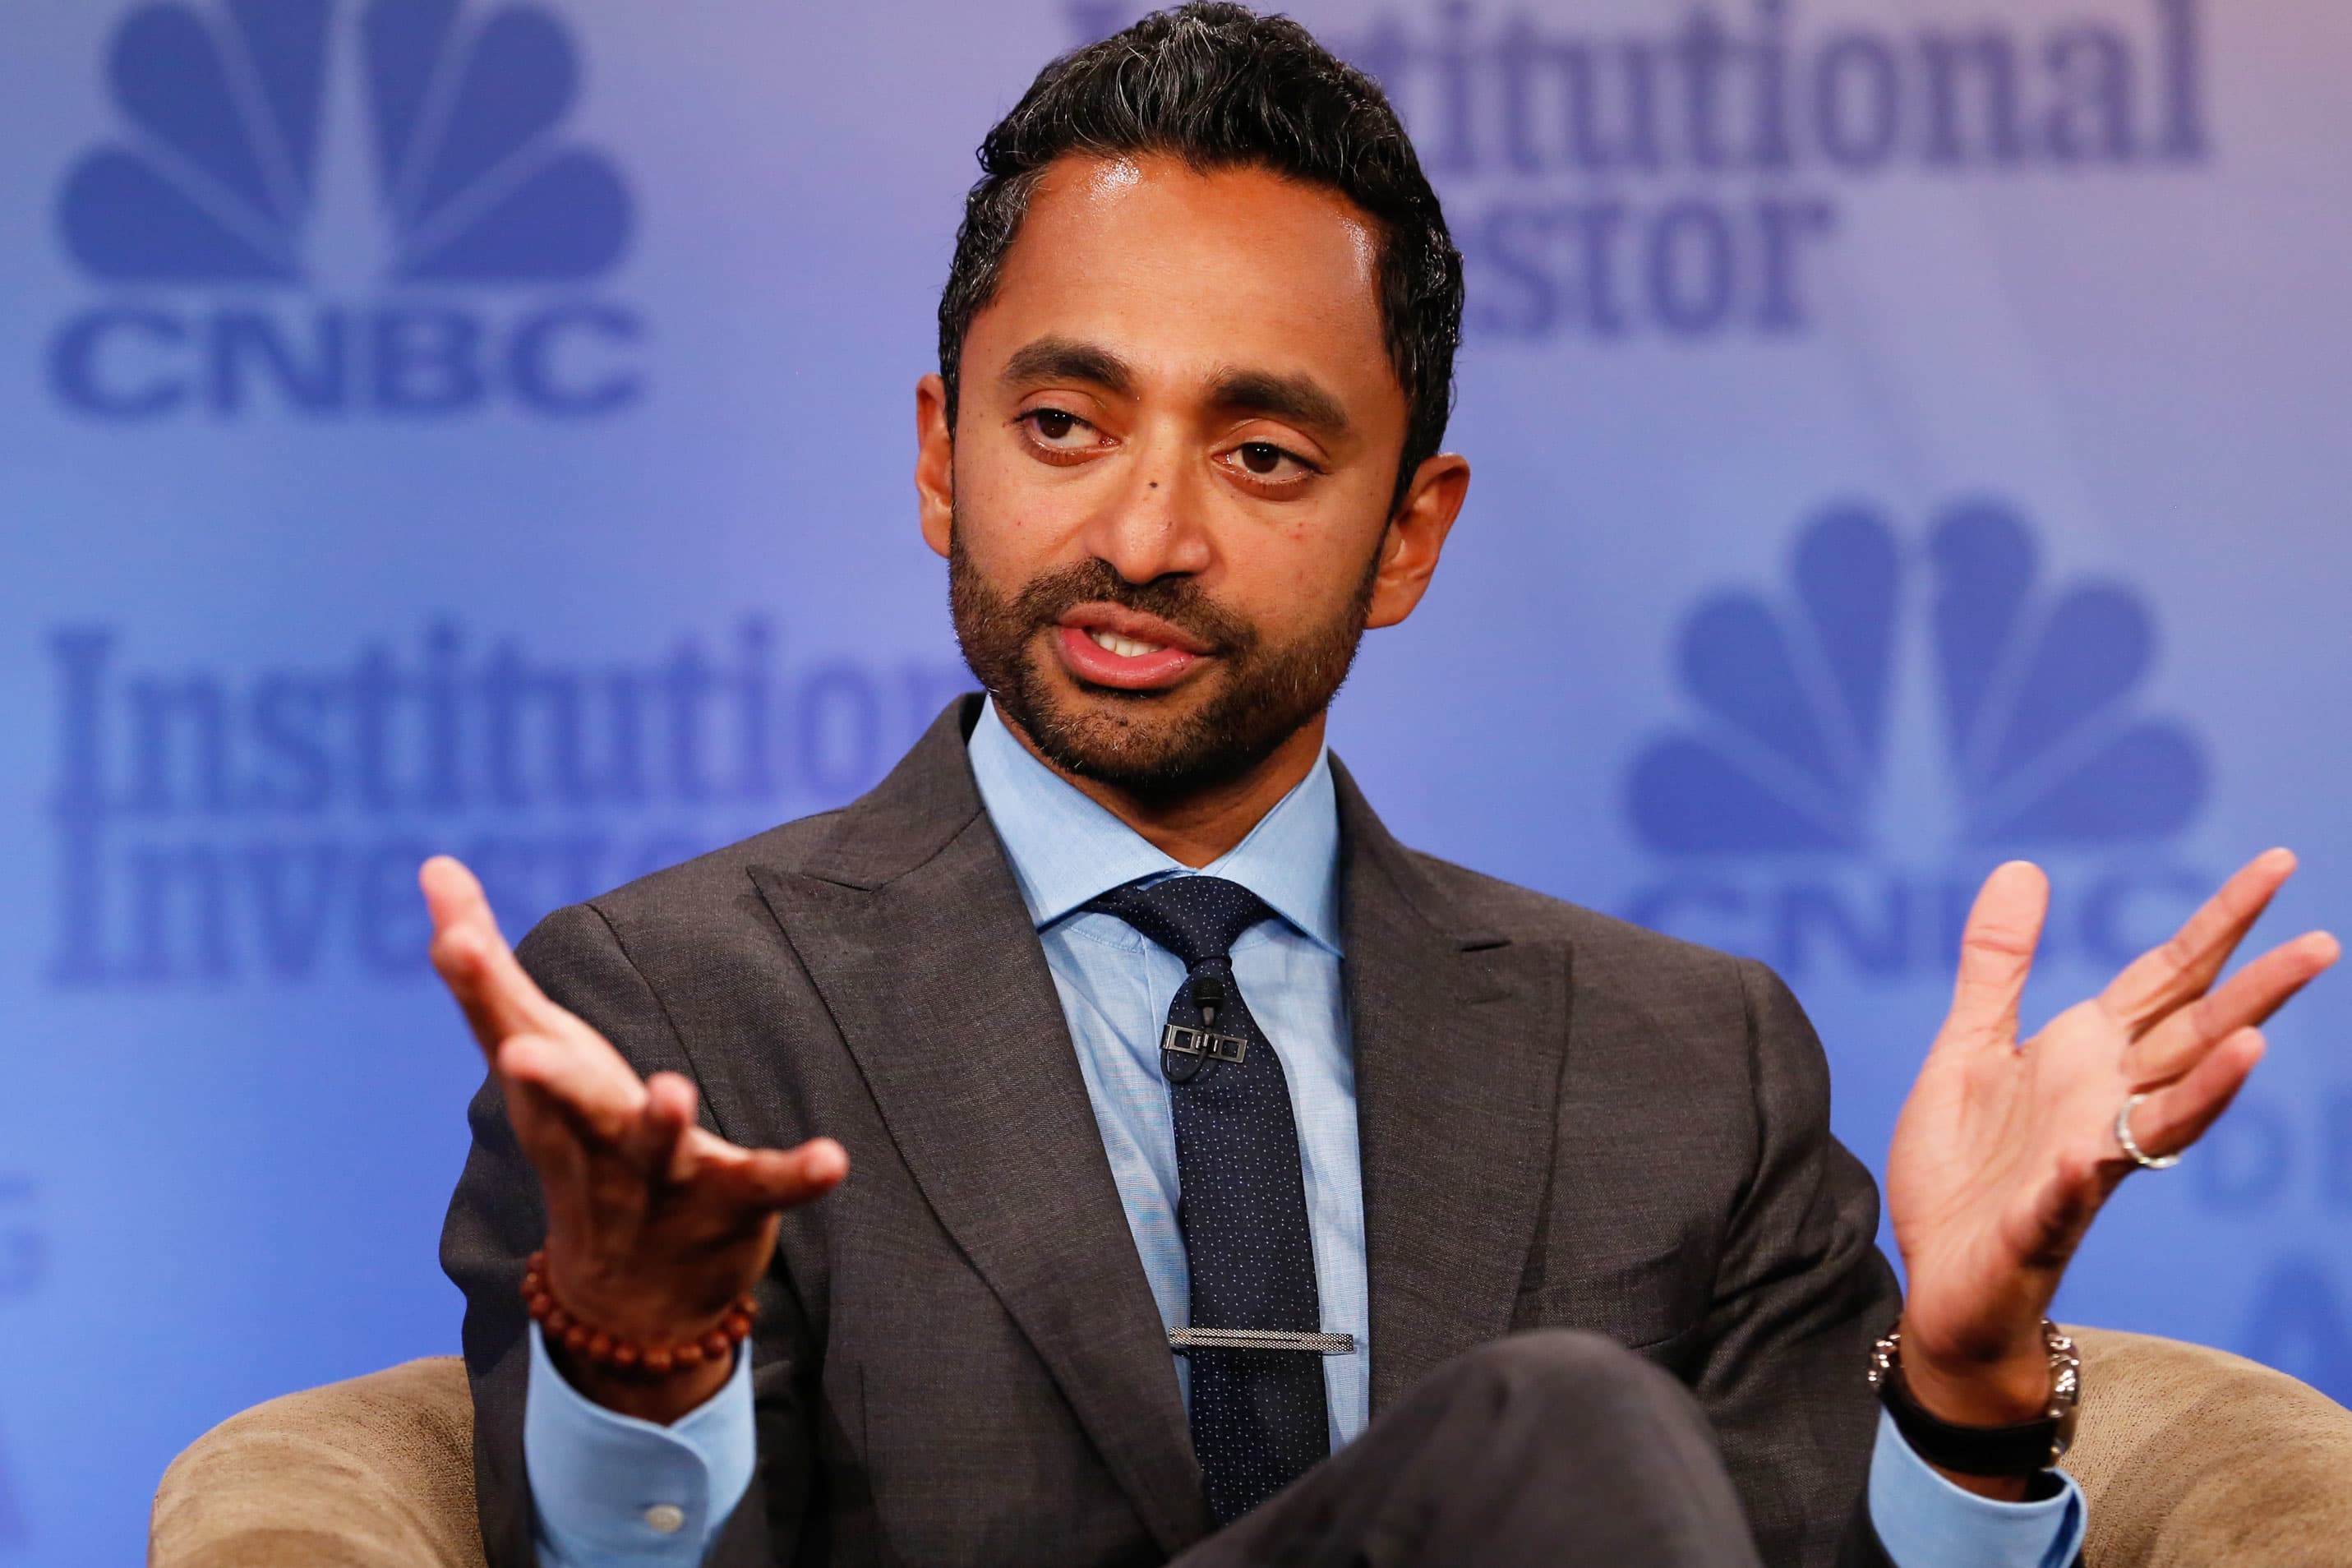 Palihapitiya says money for savings will be “rocket fuel” for assets such as housing and stocks